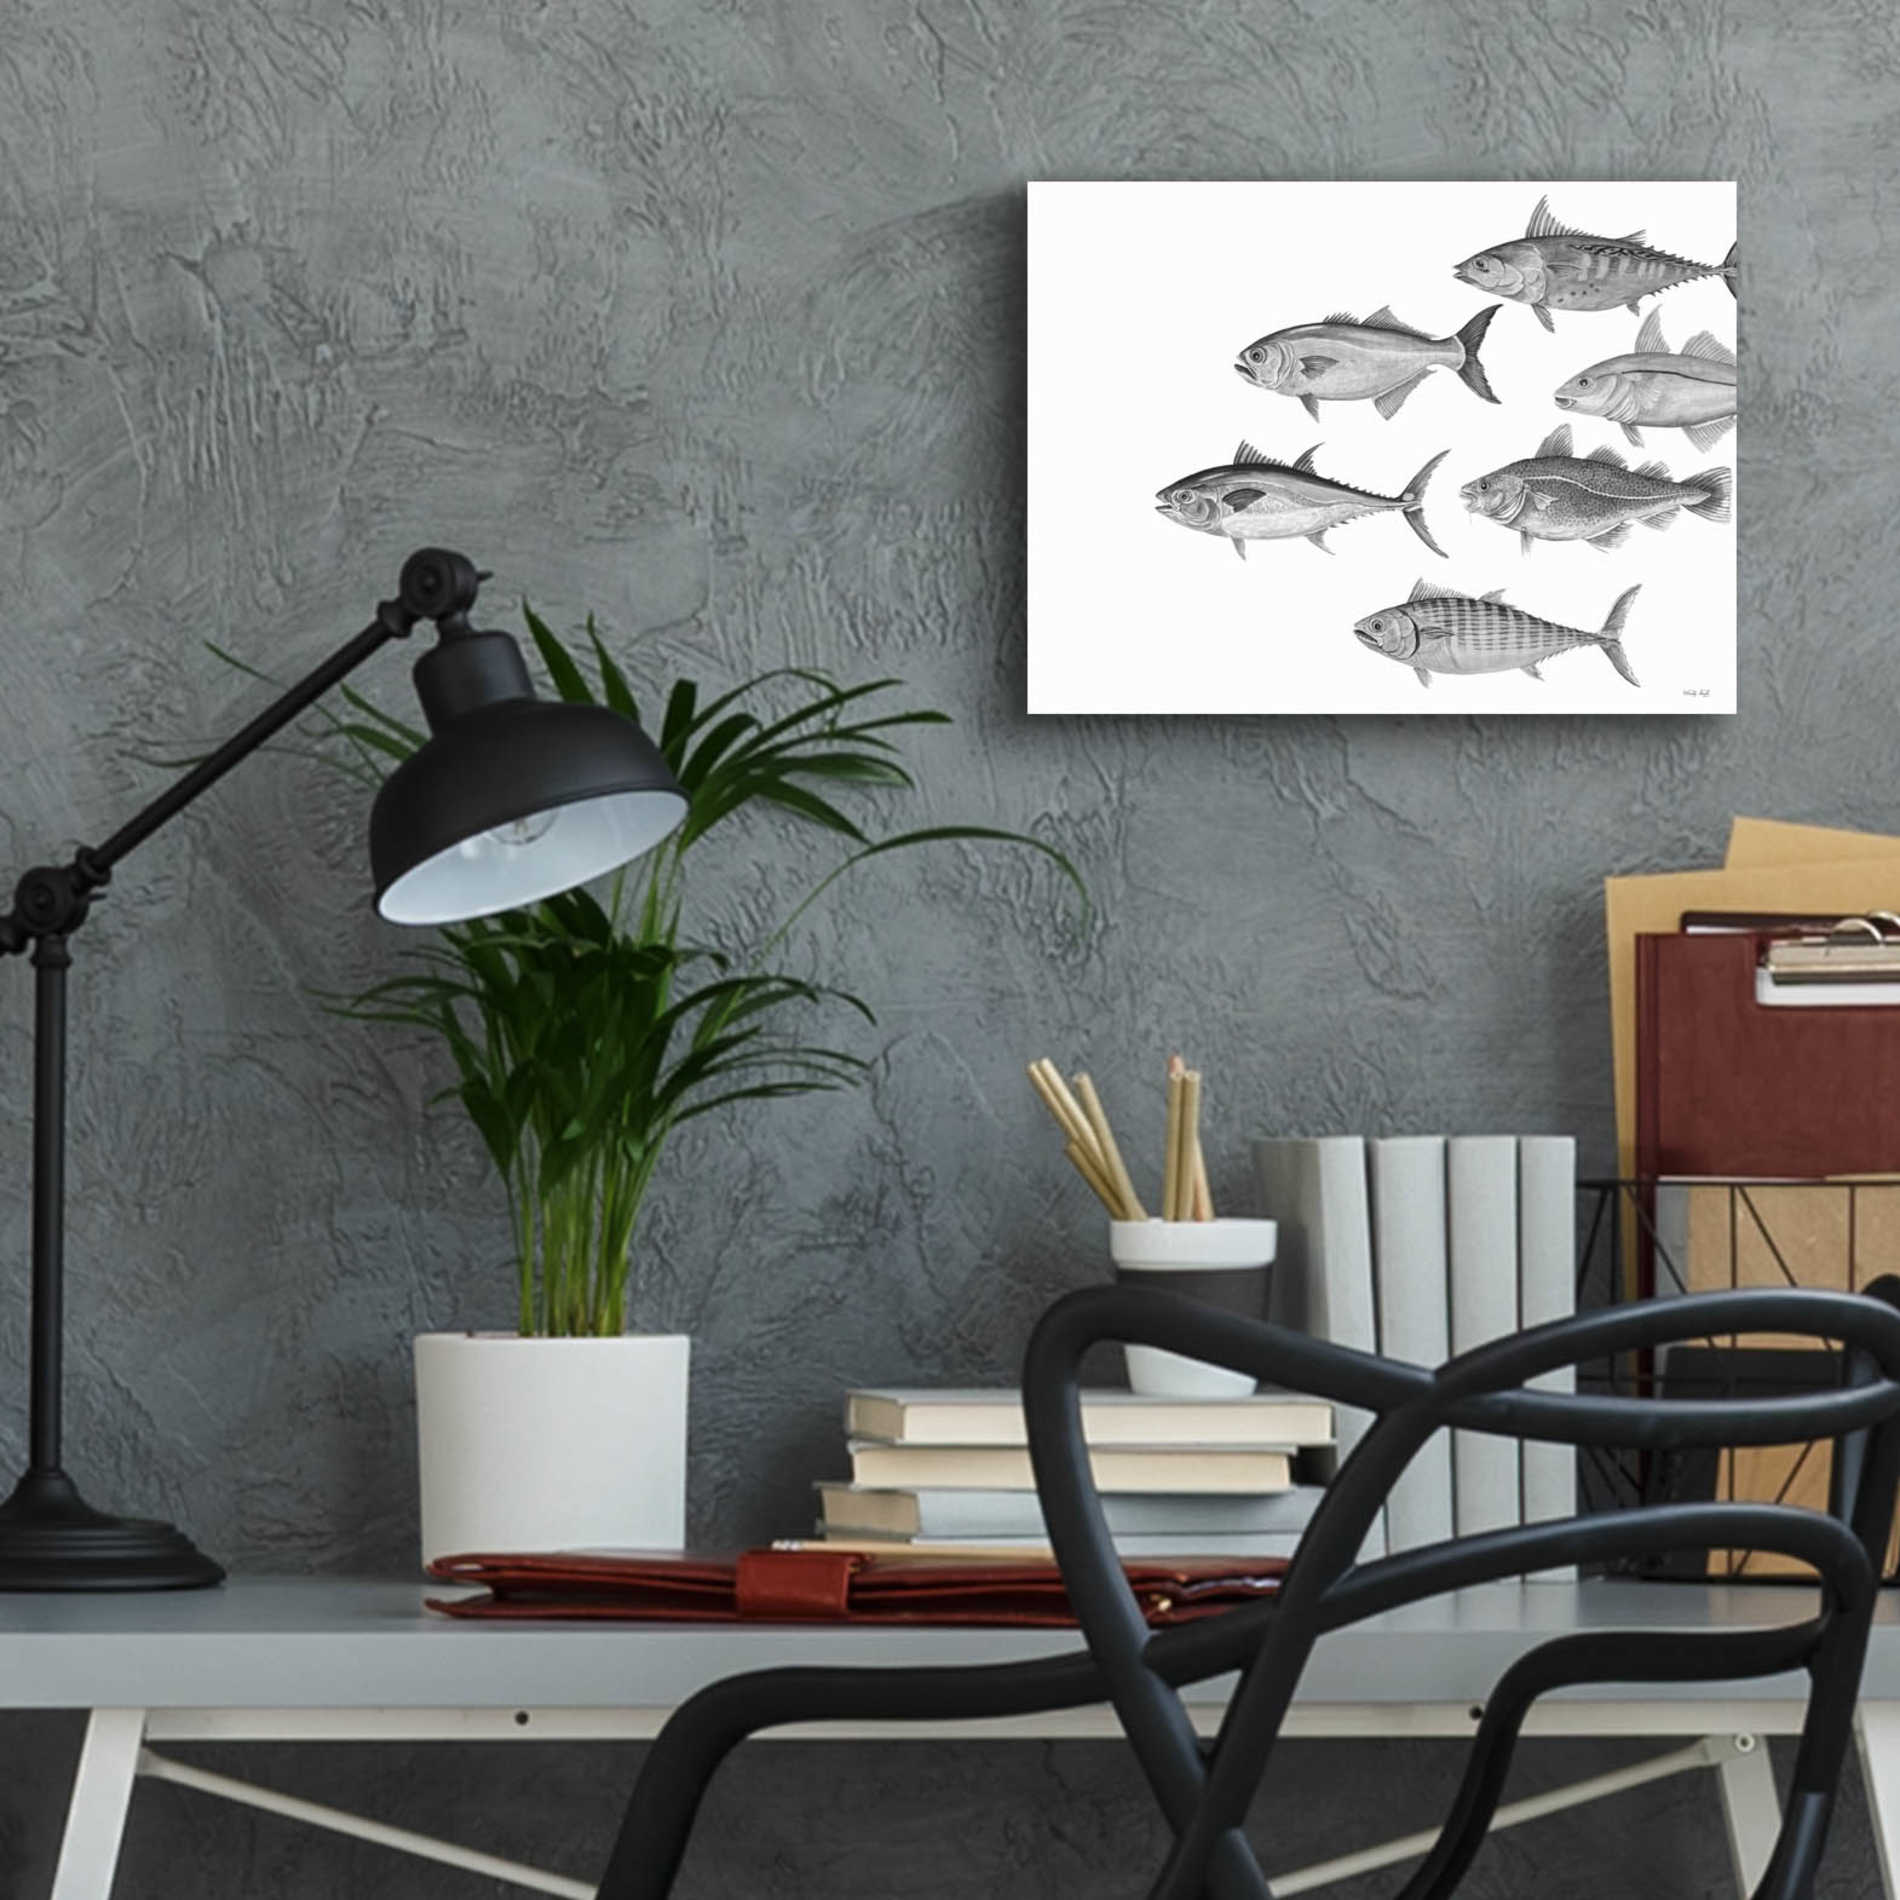 Epic Art 'Variety of Fish II' by Cindy Jacobs, Acrylic Glass Wall Art,16x12